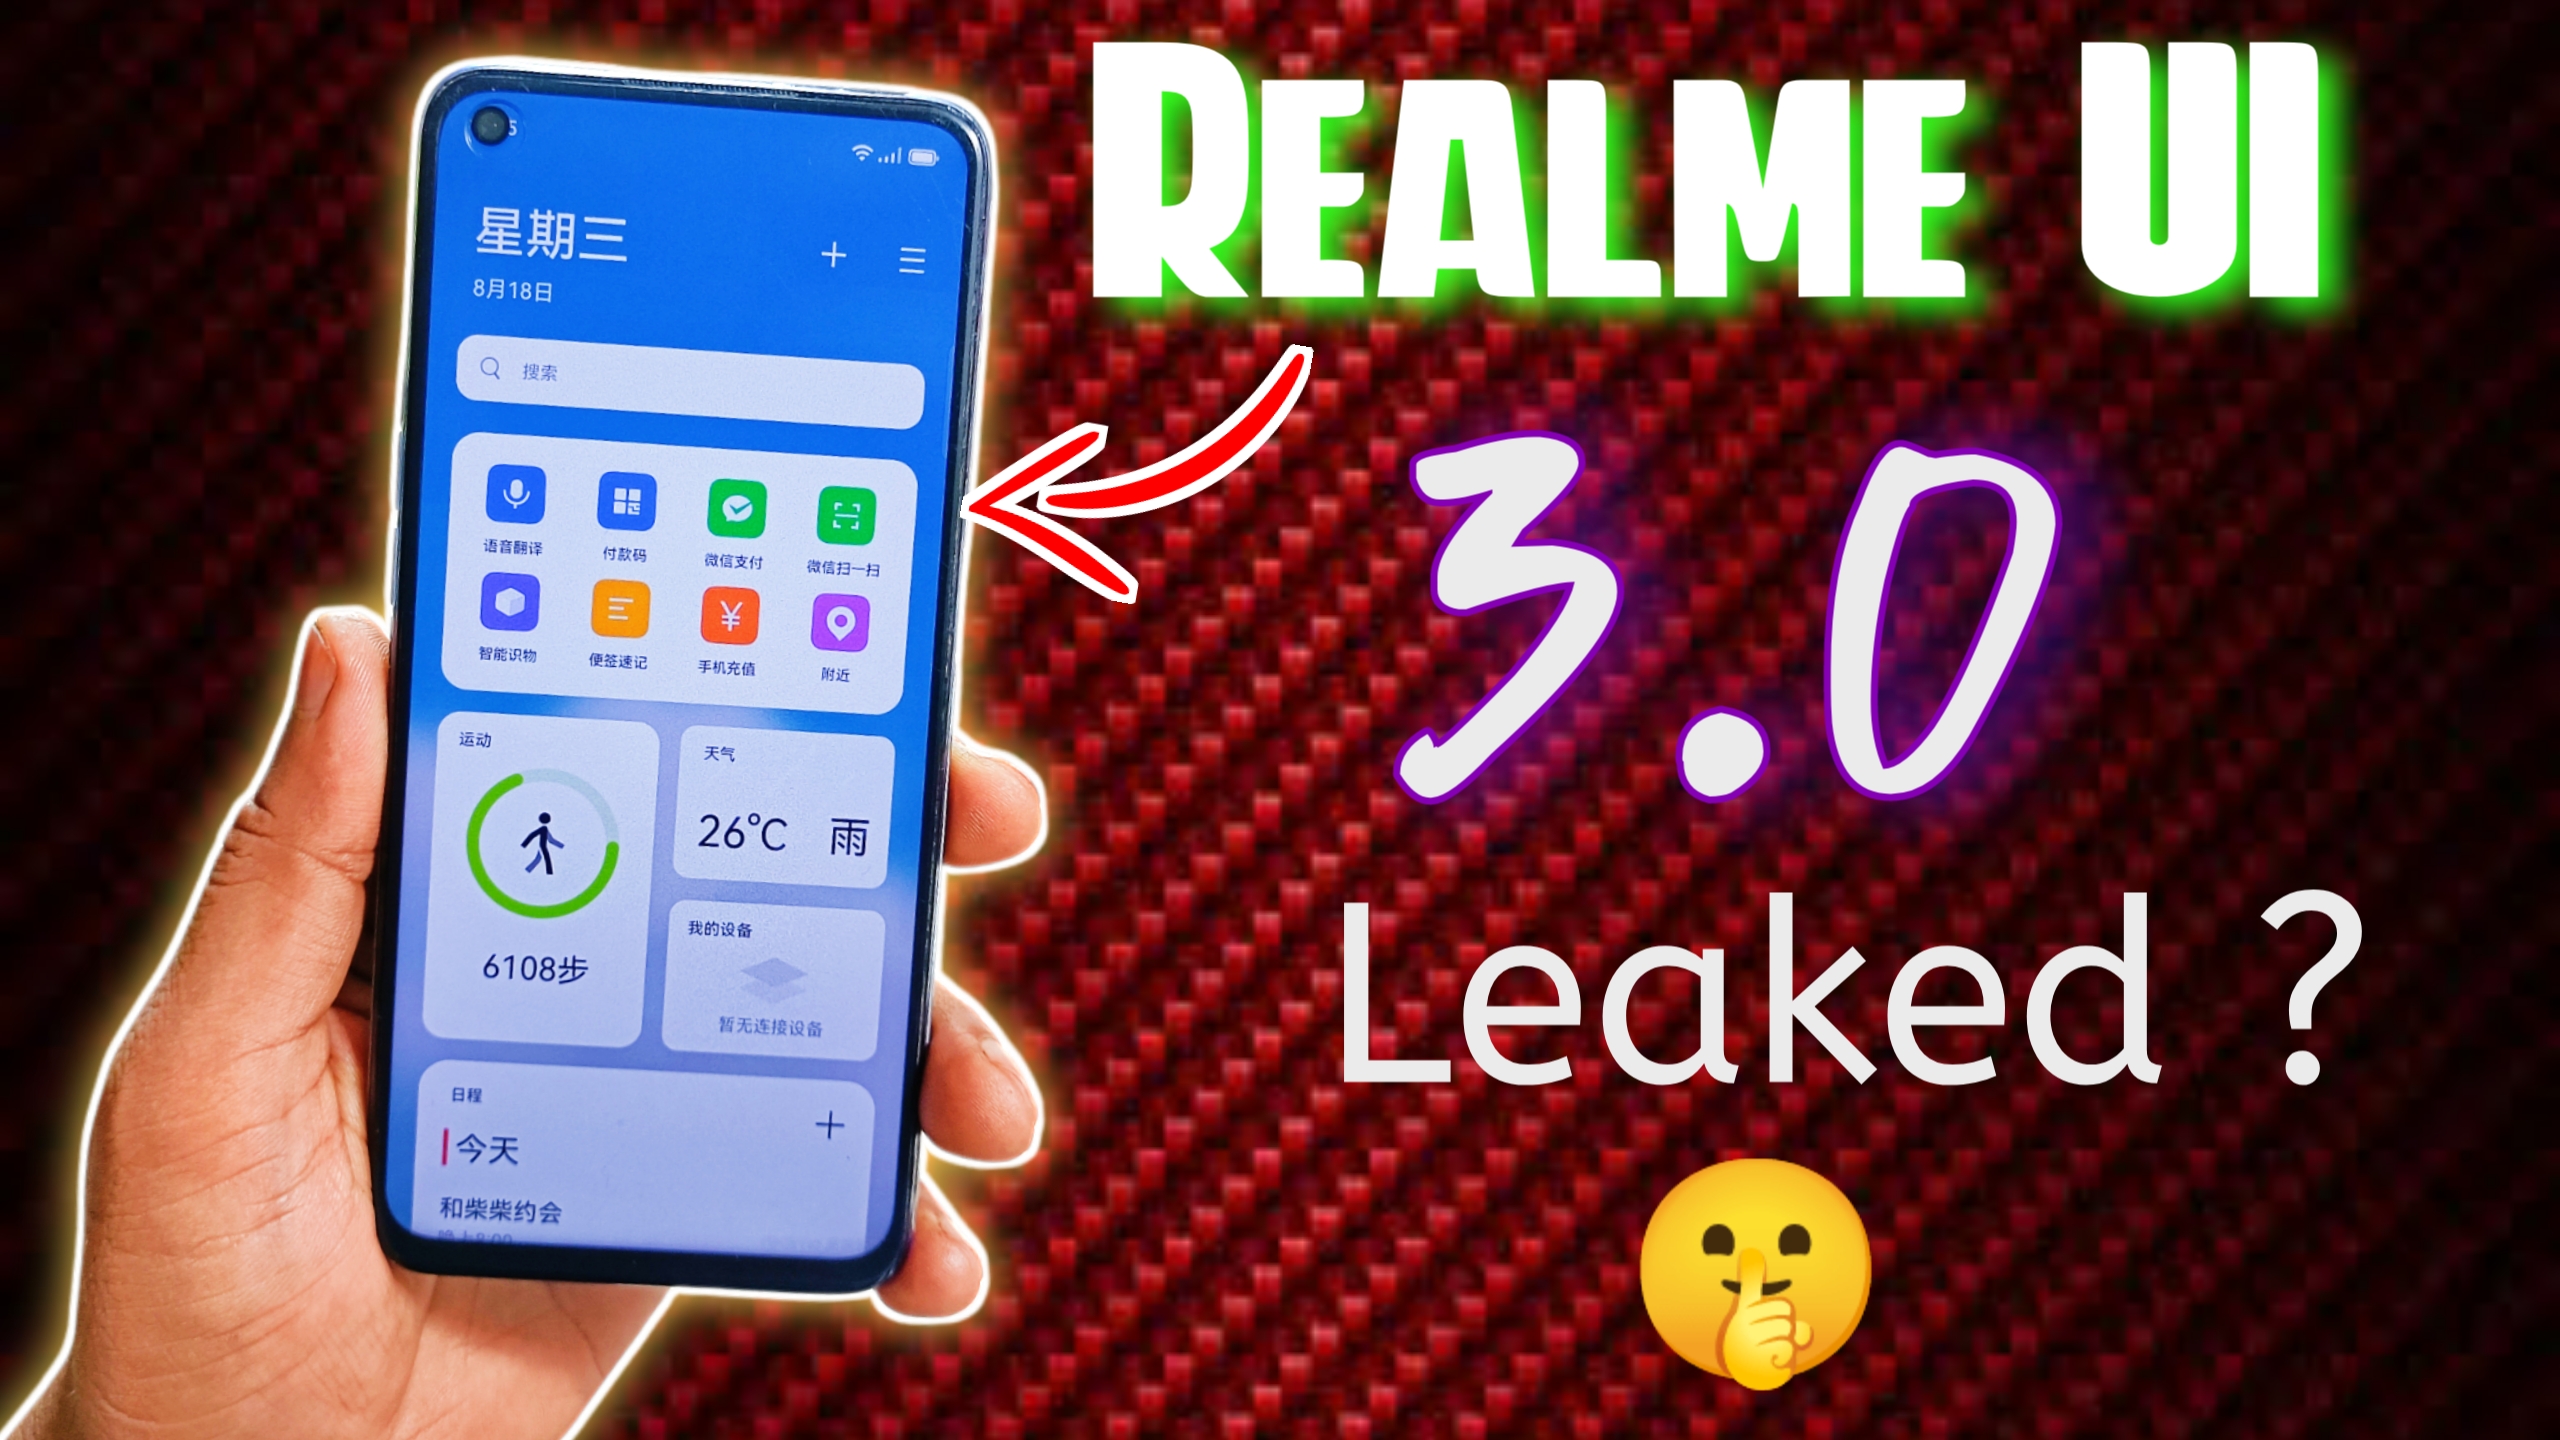 Realme Ui Leaked Uping Features Atul Tech